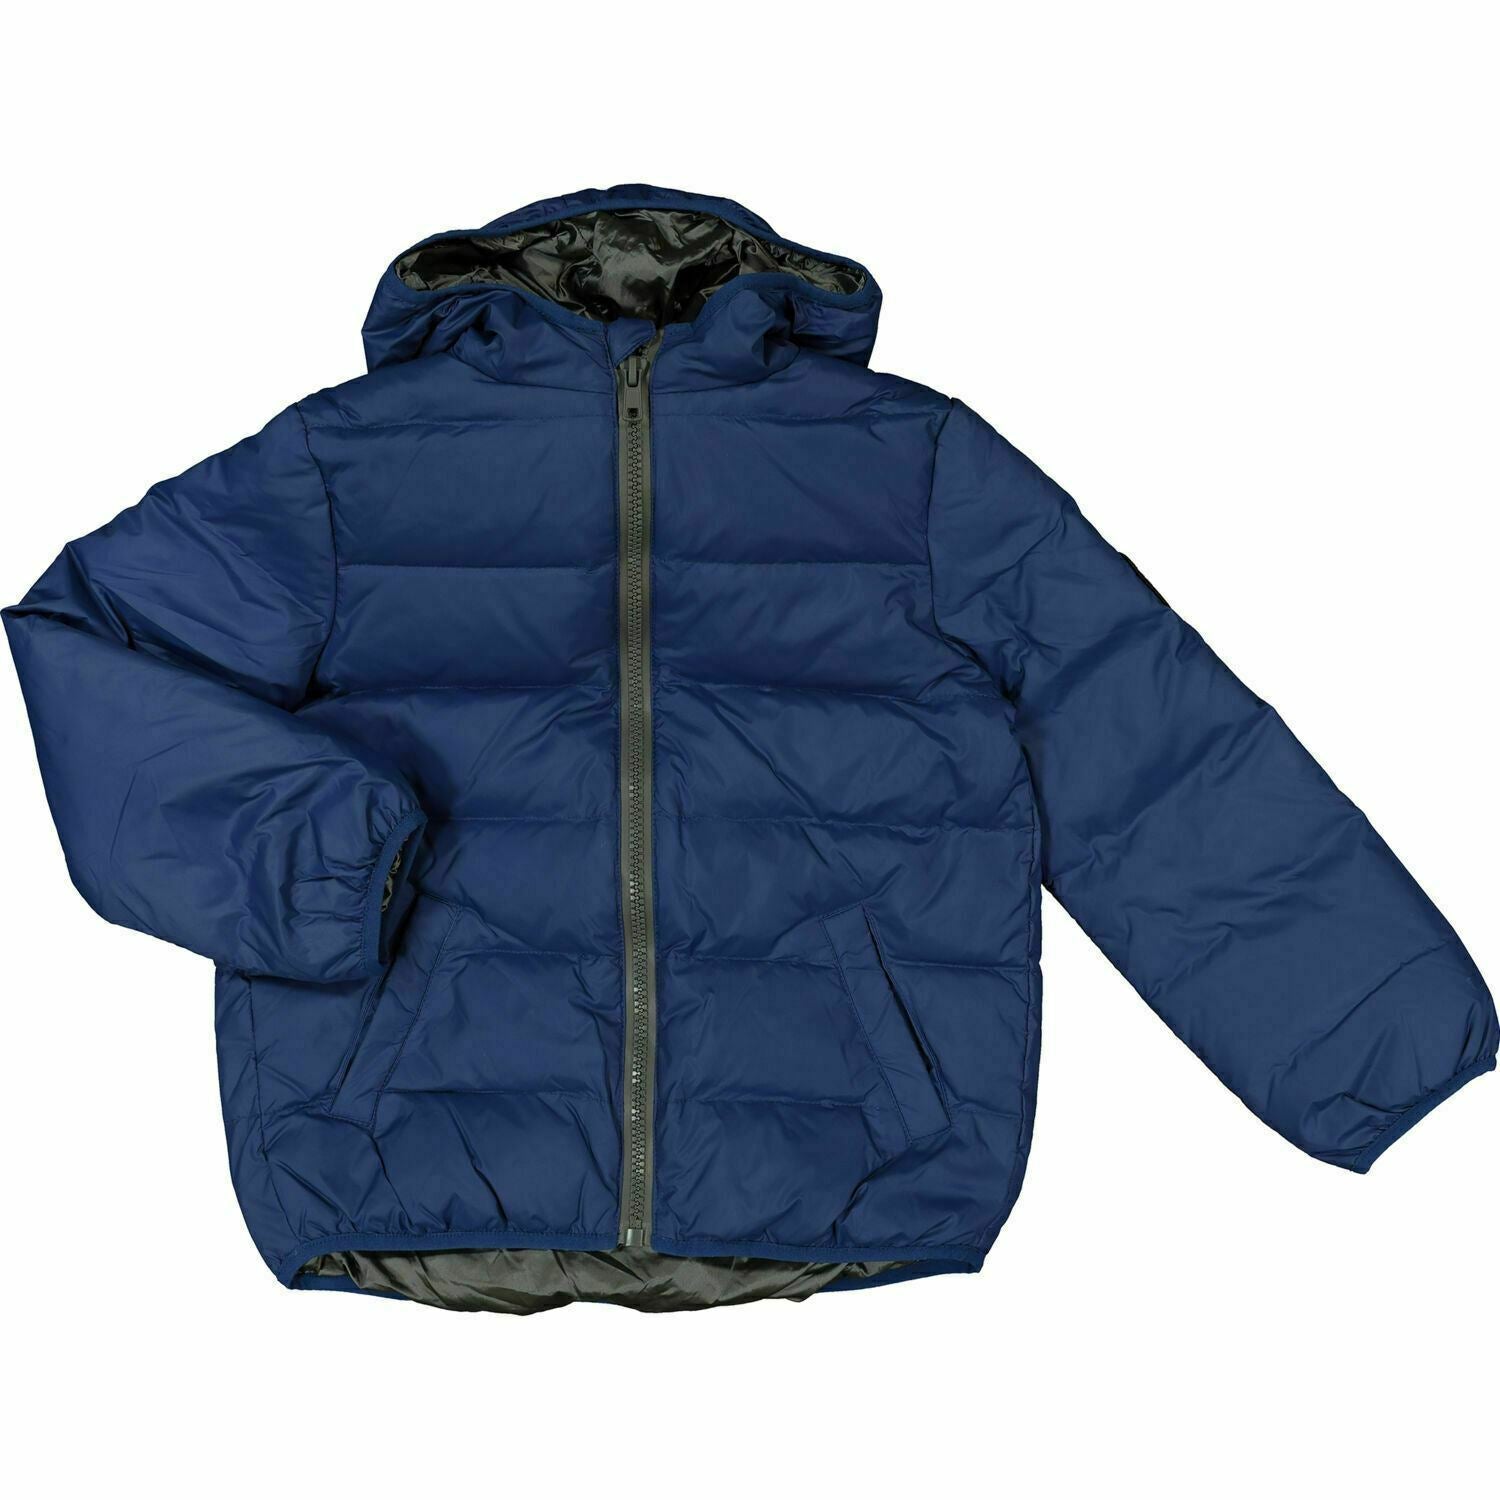 BONPOINT Boys' FINLEY Lightweight Hooded Padded Jacket, Navy Blue, size 4 years